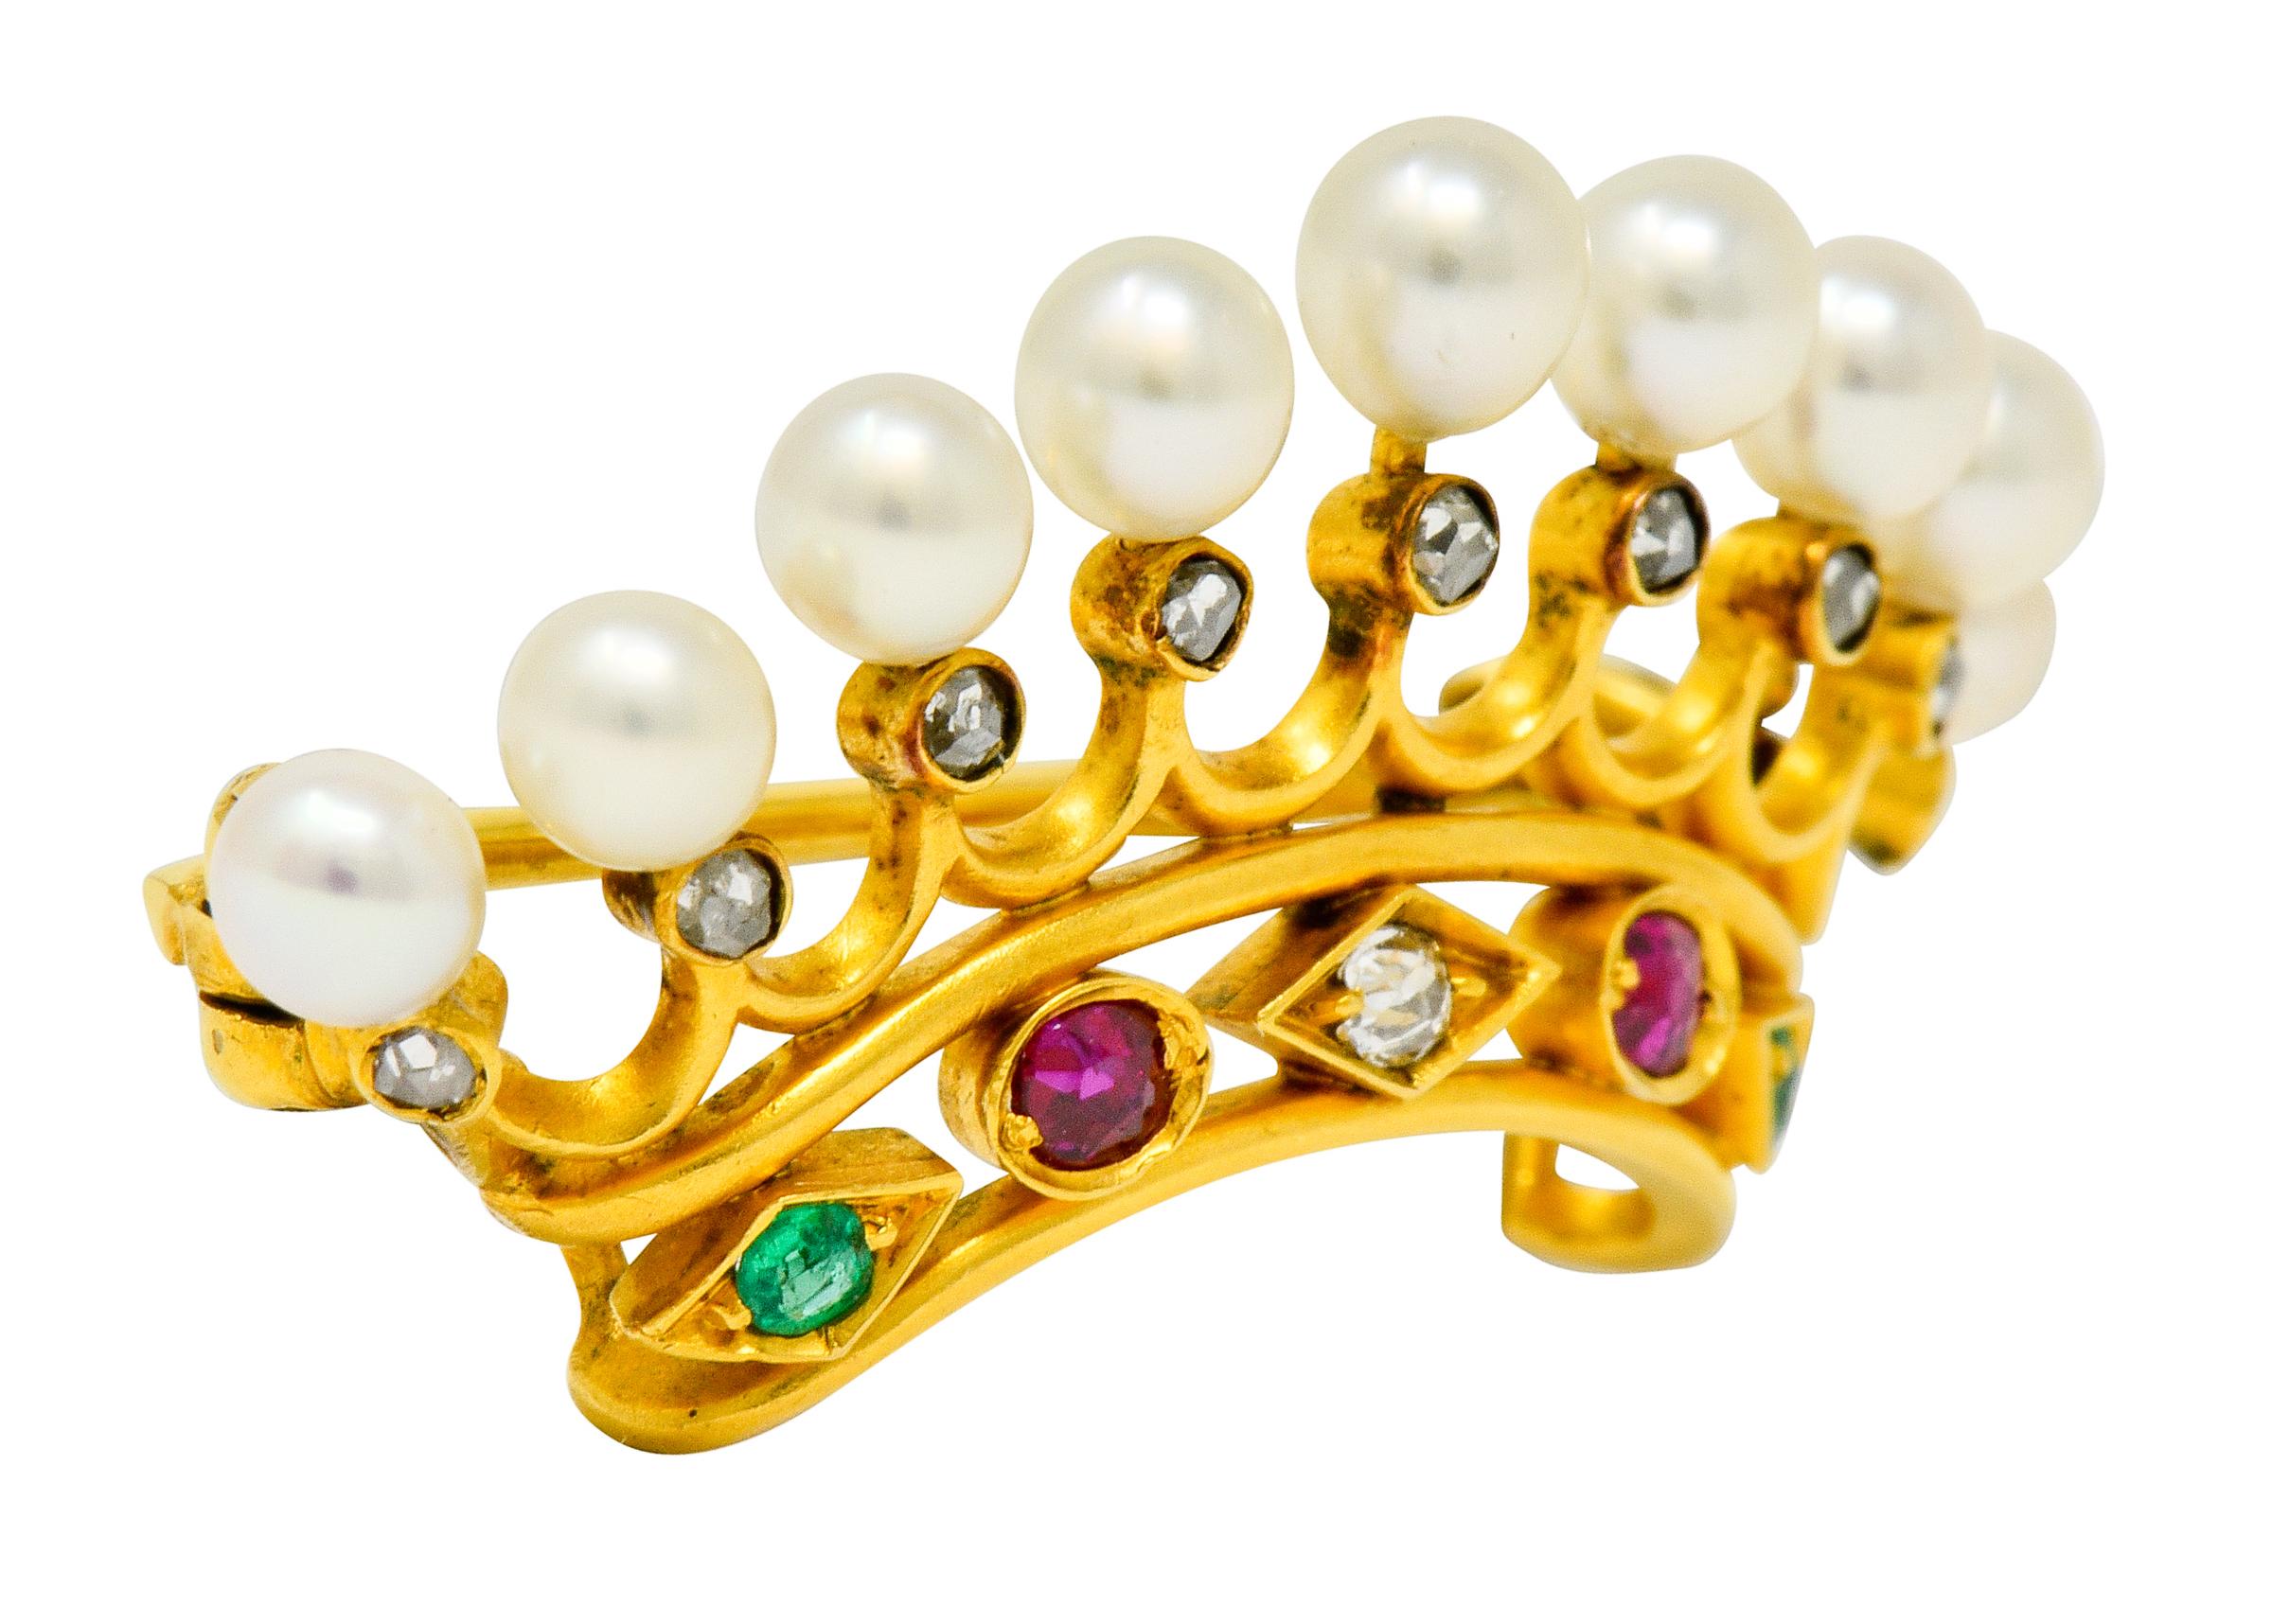 Brooch is designed as a pierced crown with each tine as a scalloped fishtail motif accented by rose cut diamonds

Each tine is topped by a round pearl, measuring from 3.3 to 3.5 mm, and are a well-matched cream body color with excellent